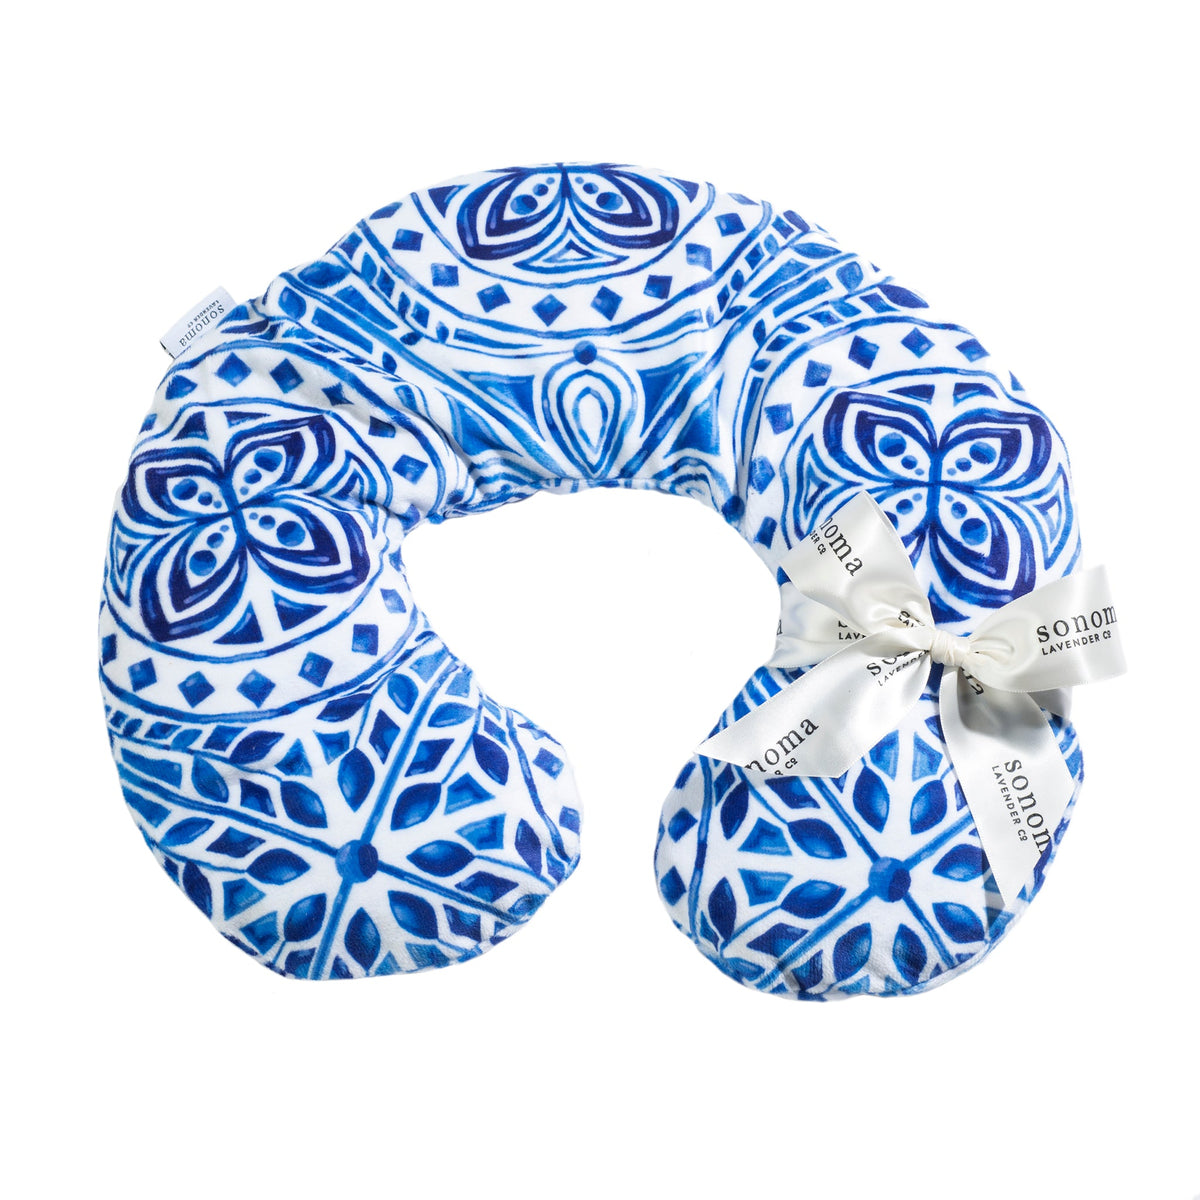 A Sonoma Lavender Sonoma OceanAire Santorini Mosaic neck pillow, designed in a u-shape with an OceanAire scent, features circular and geometric shapes and has visible brand tags attached.